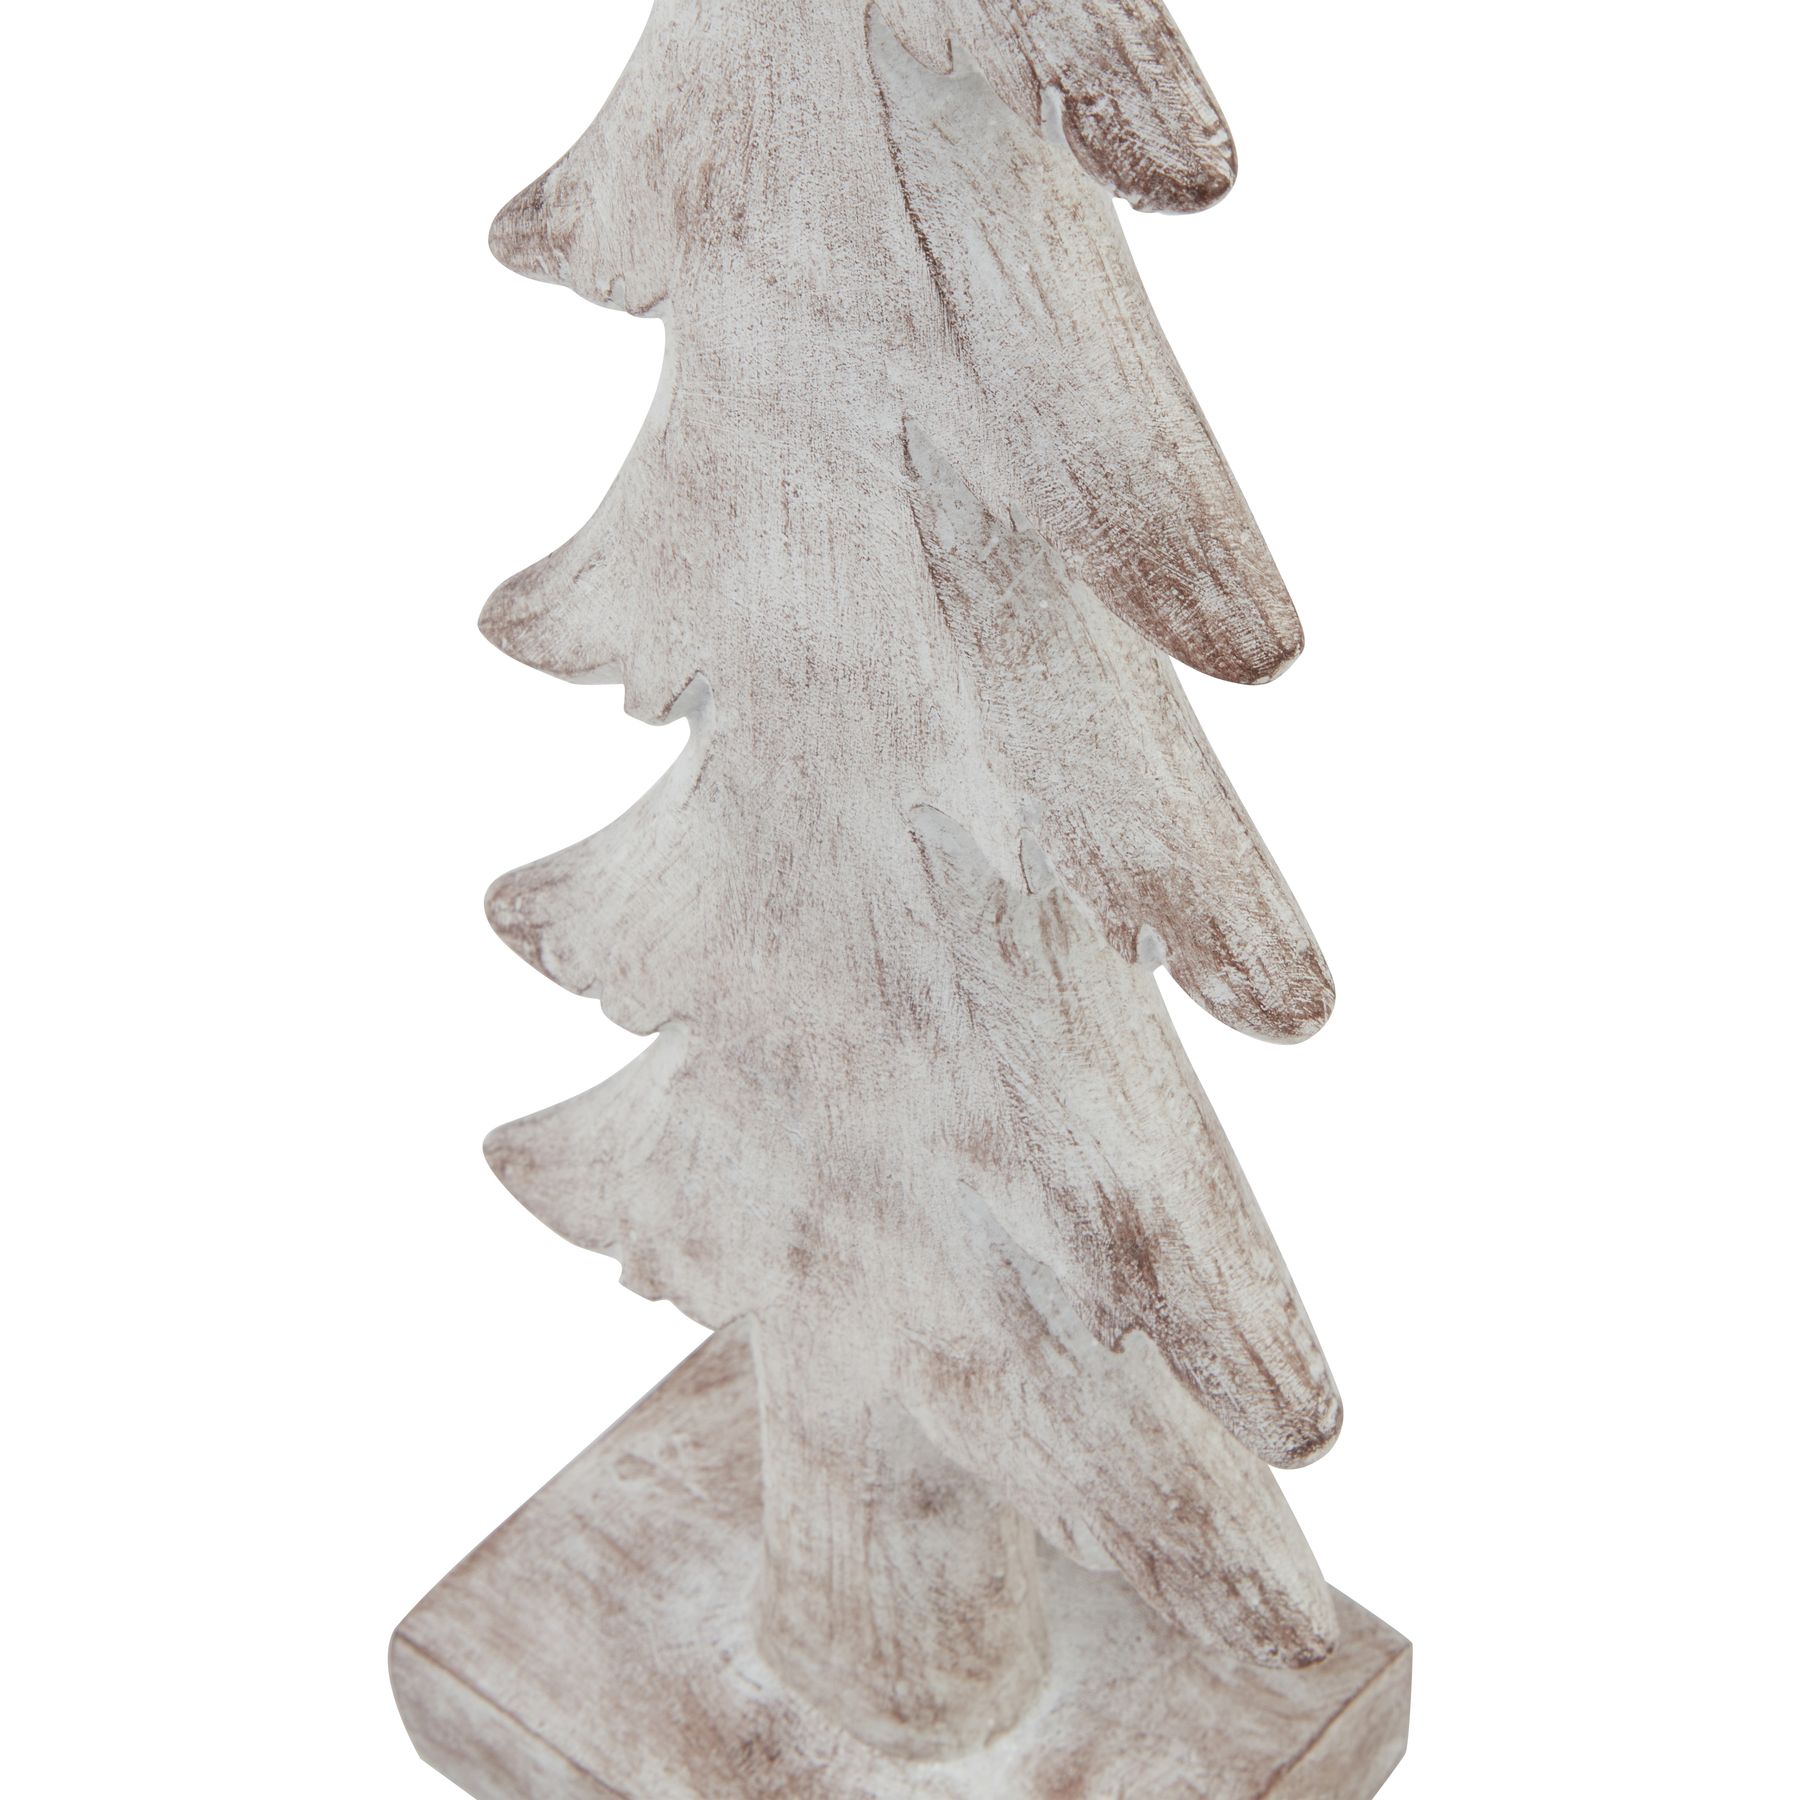 Large Snowy Forest Tree Sculpture - Image 2